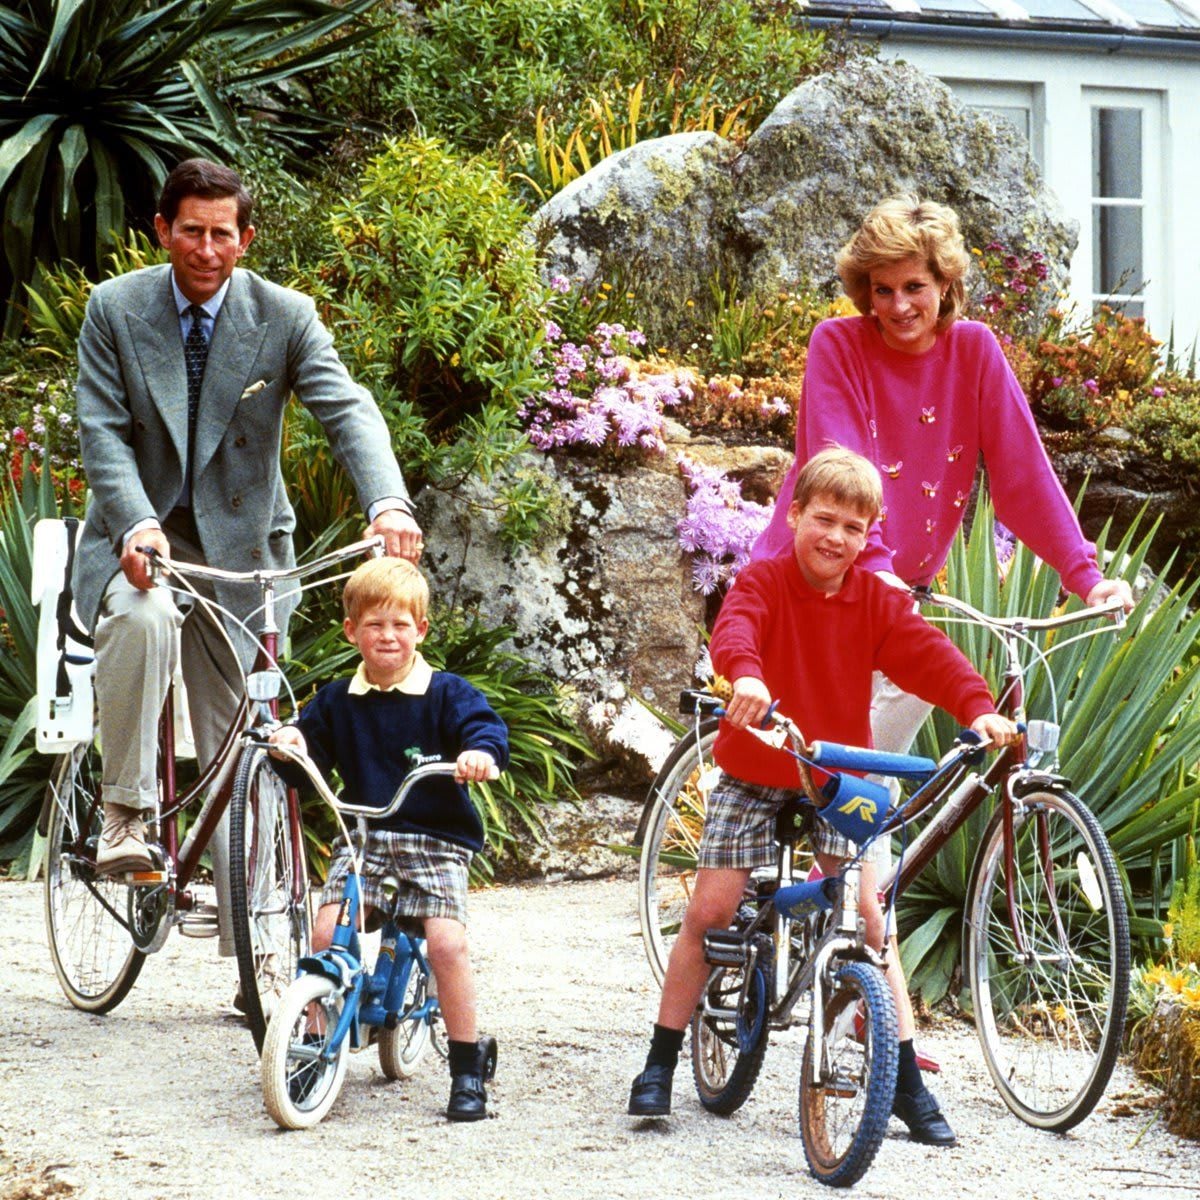 During their 1989 holiday in Tresco on the Isles of Scilly, Prince Charles and Princess Diana enjoyed a bike ride with their sons, Harry and William.